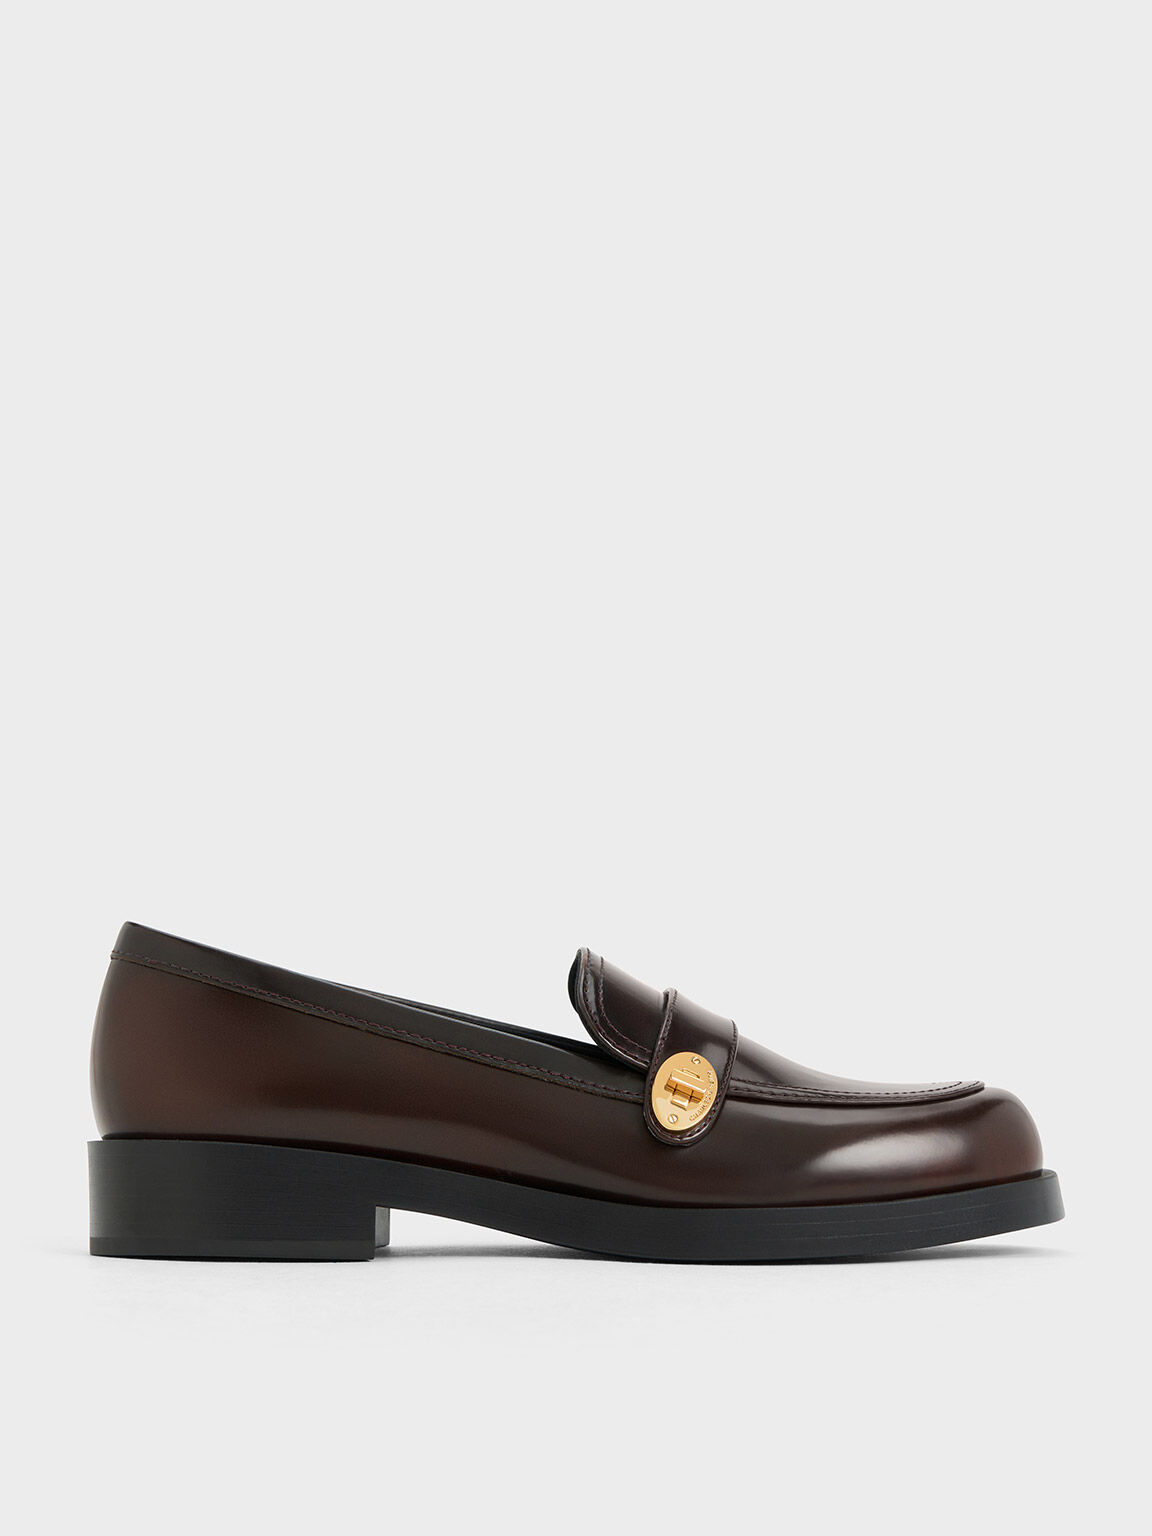 Women's Loafers | Shop Exclusive Styles | CHARLES & KEITH 